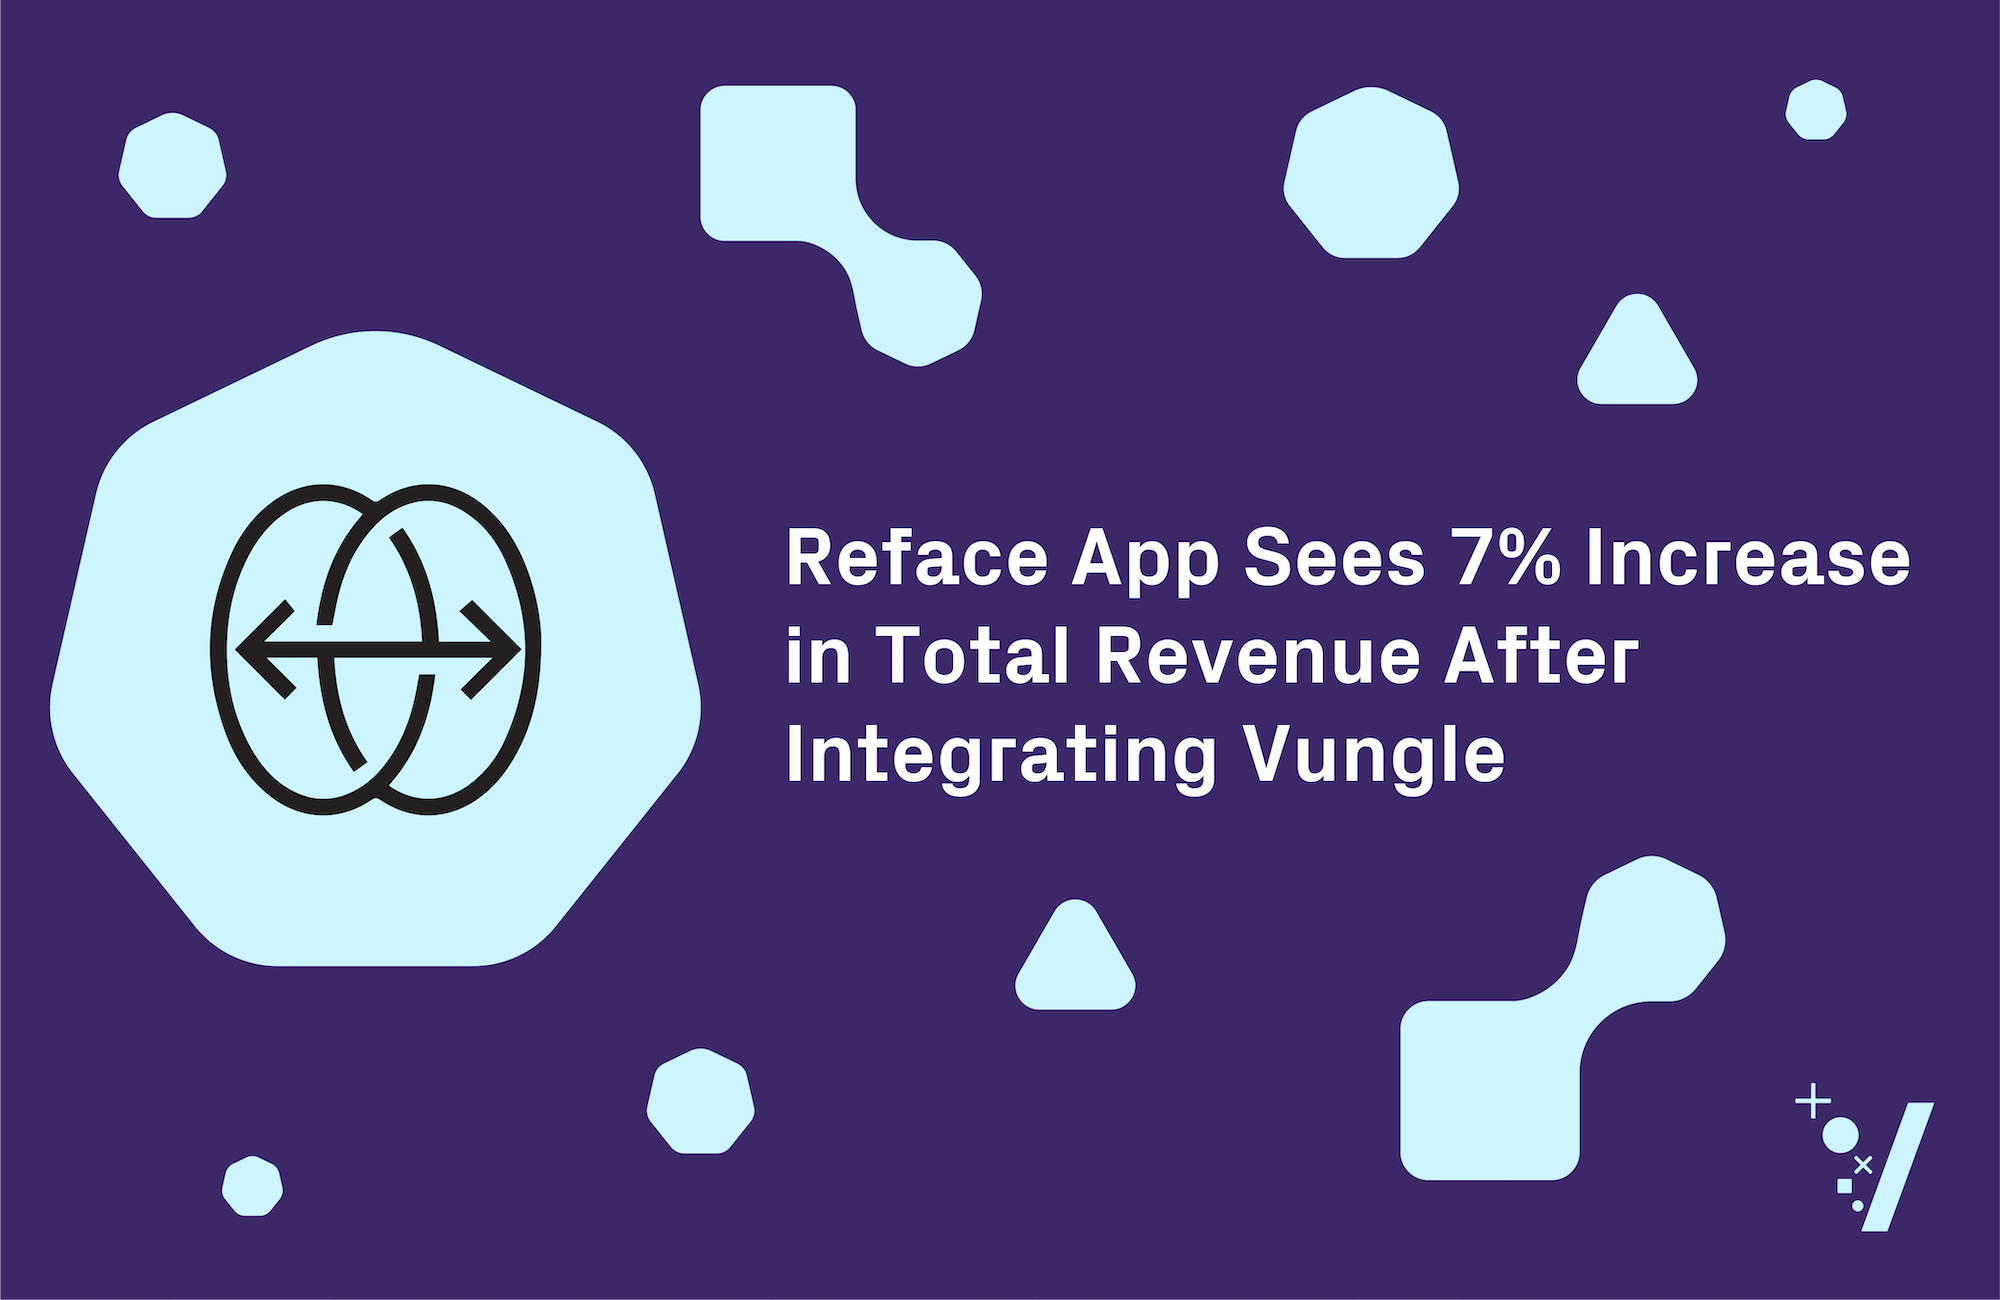 Reface App Sees 7% Increase in Total Revenue After Integrating Vungle